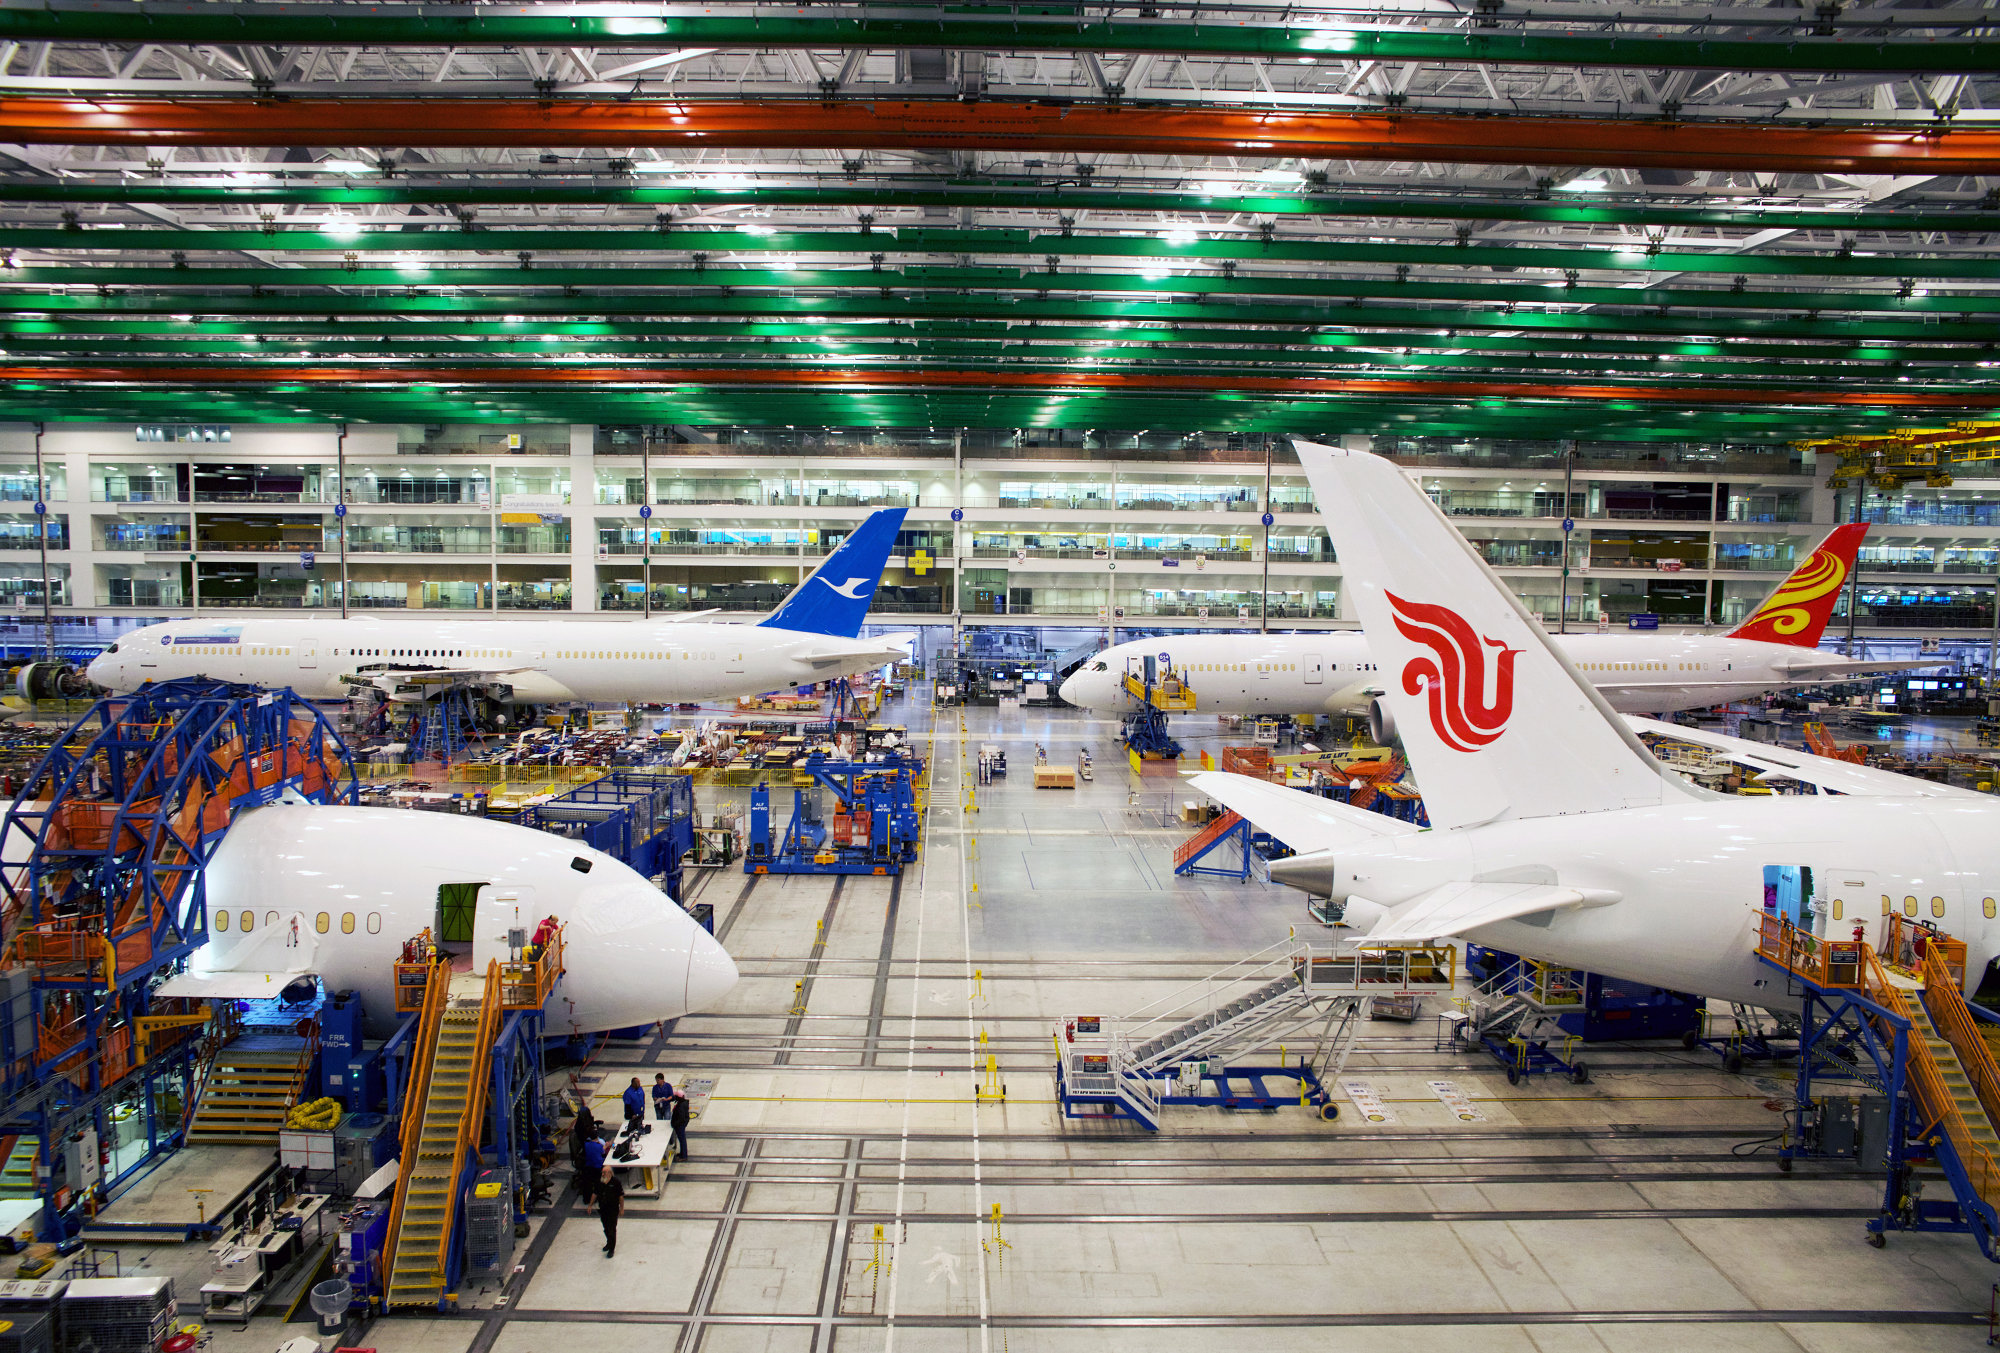 Boeing (BA) to Cut Jobs, and Output of 787 Dreamliner - Bloomberg